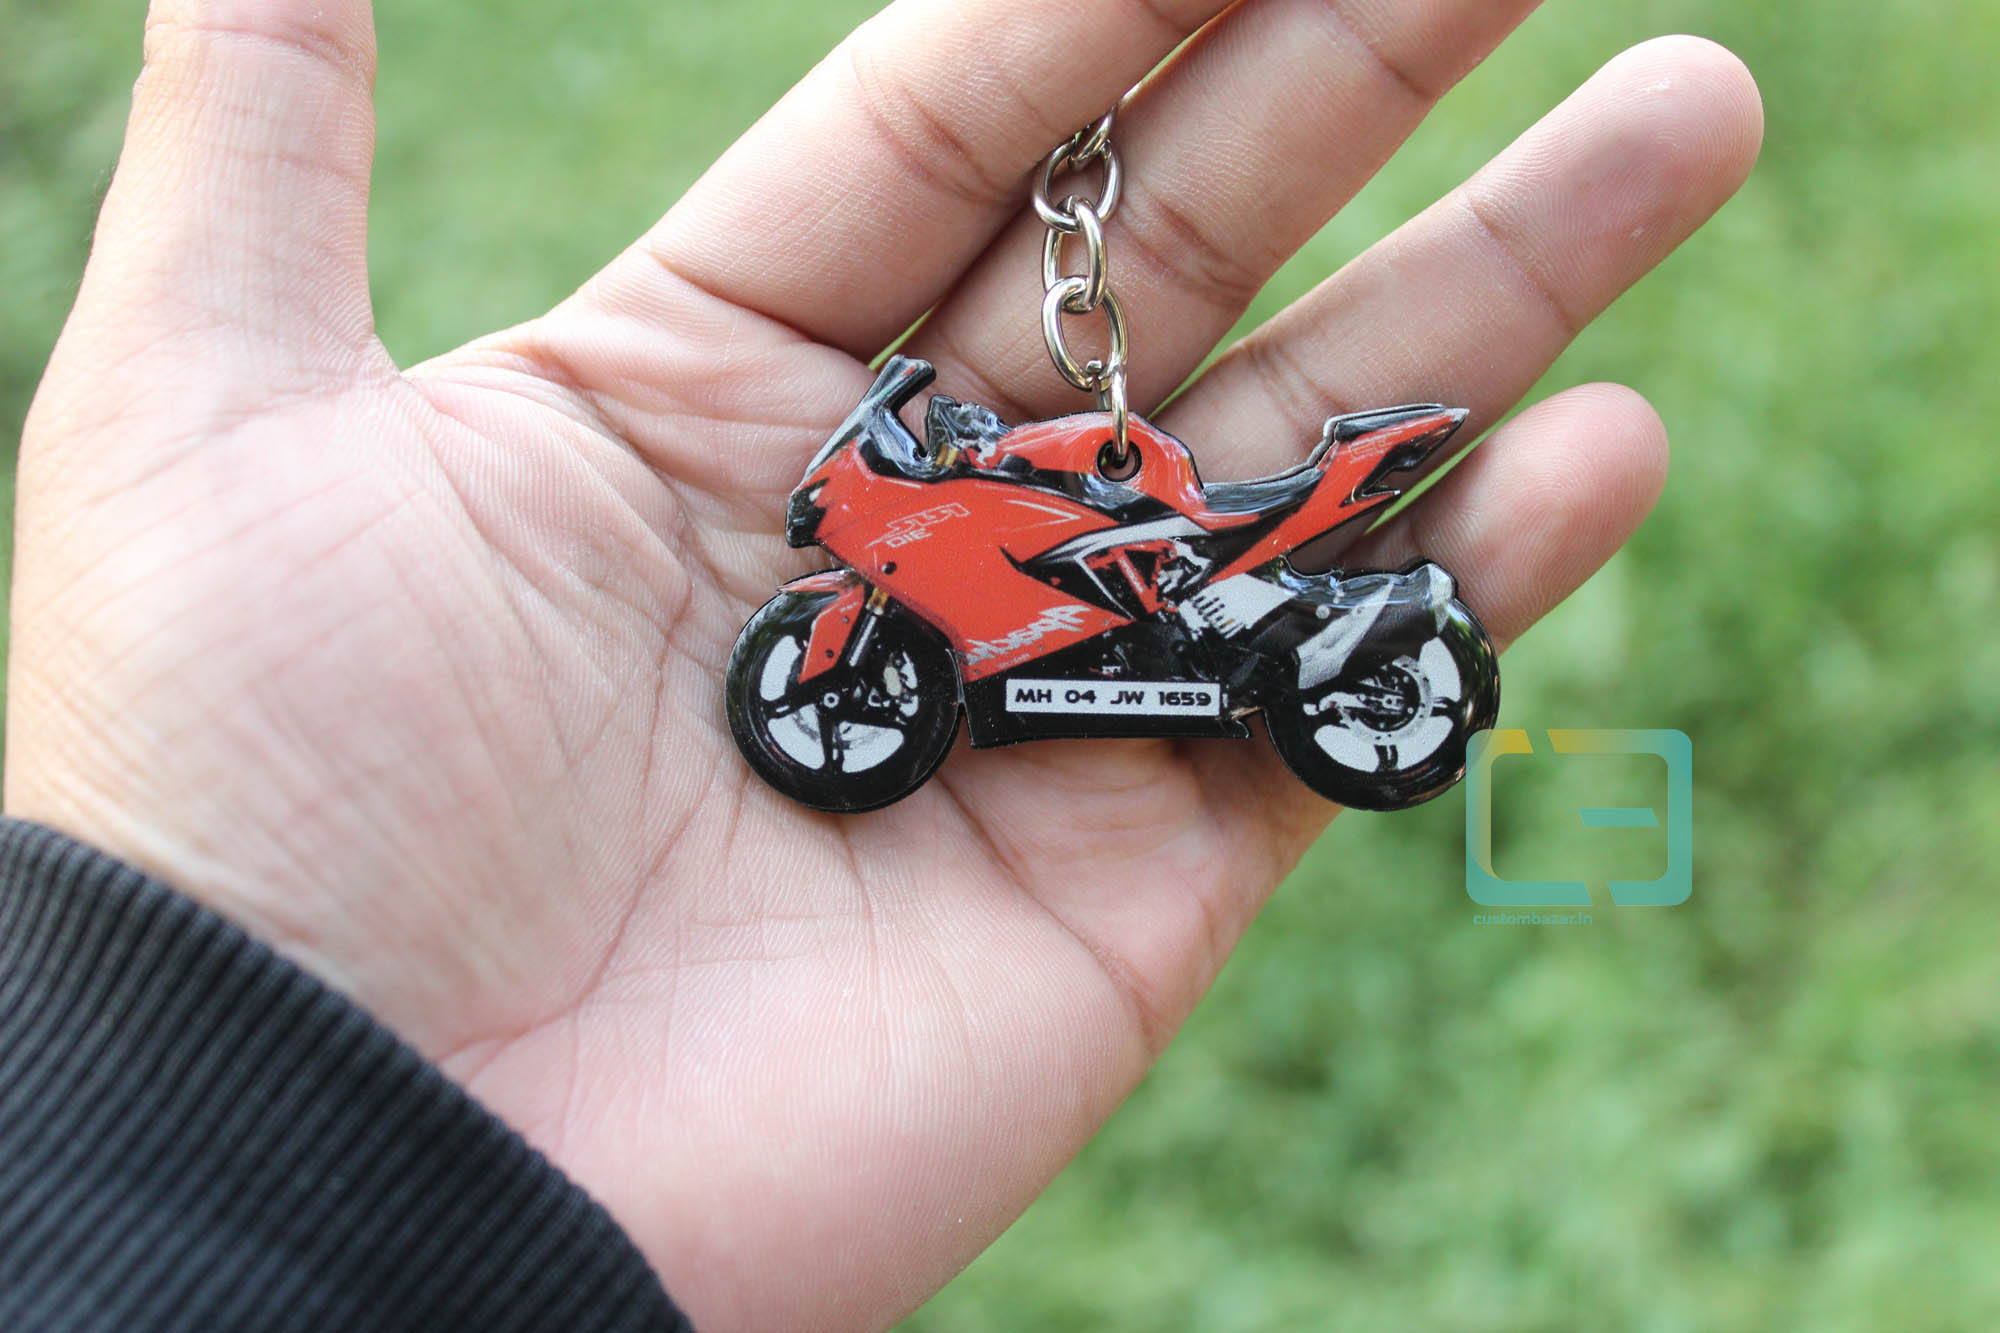 Apache Keychain - Get Best Price from Manufacturers & Suppliers in India